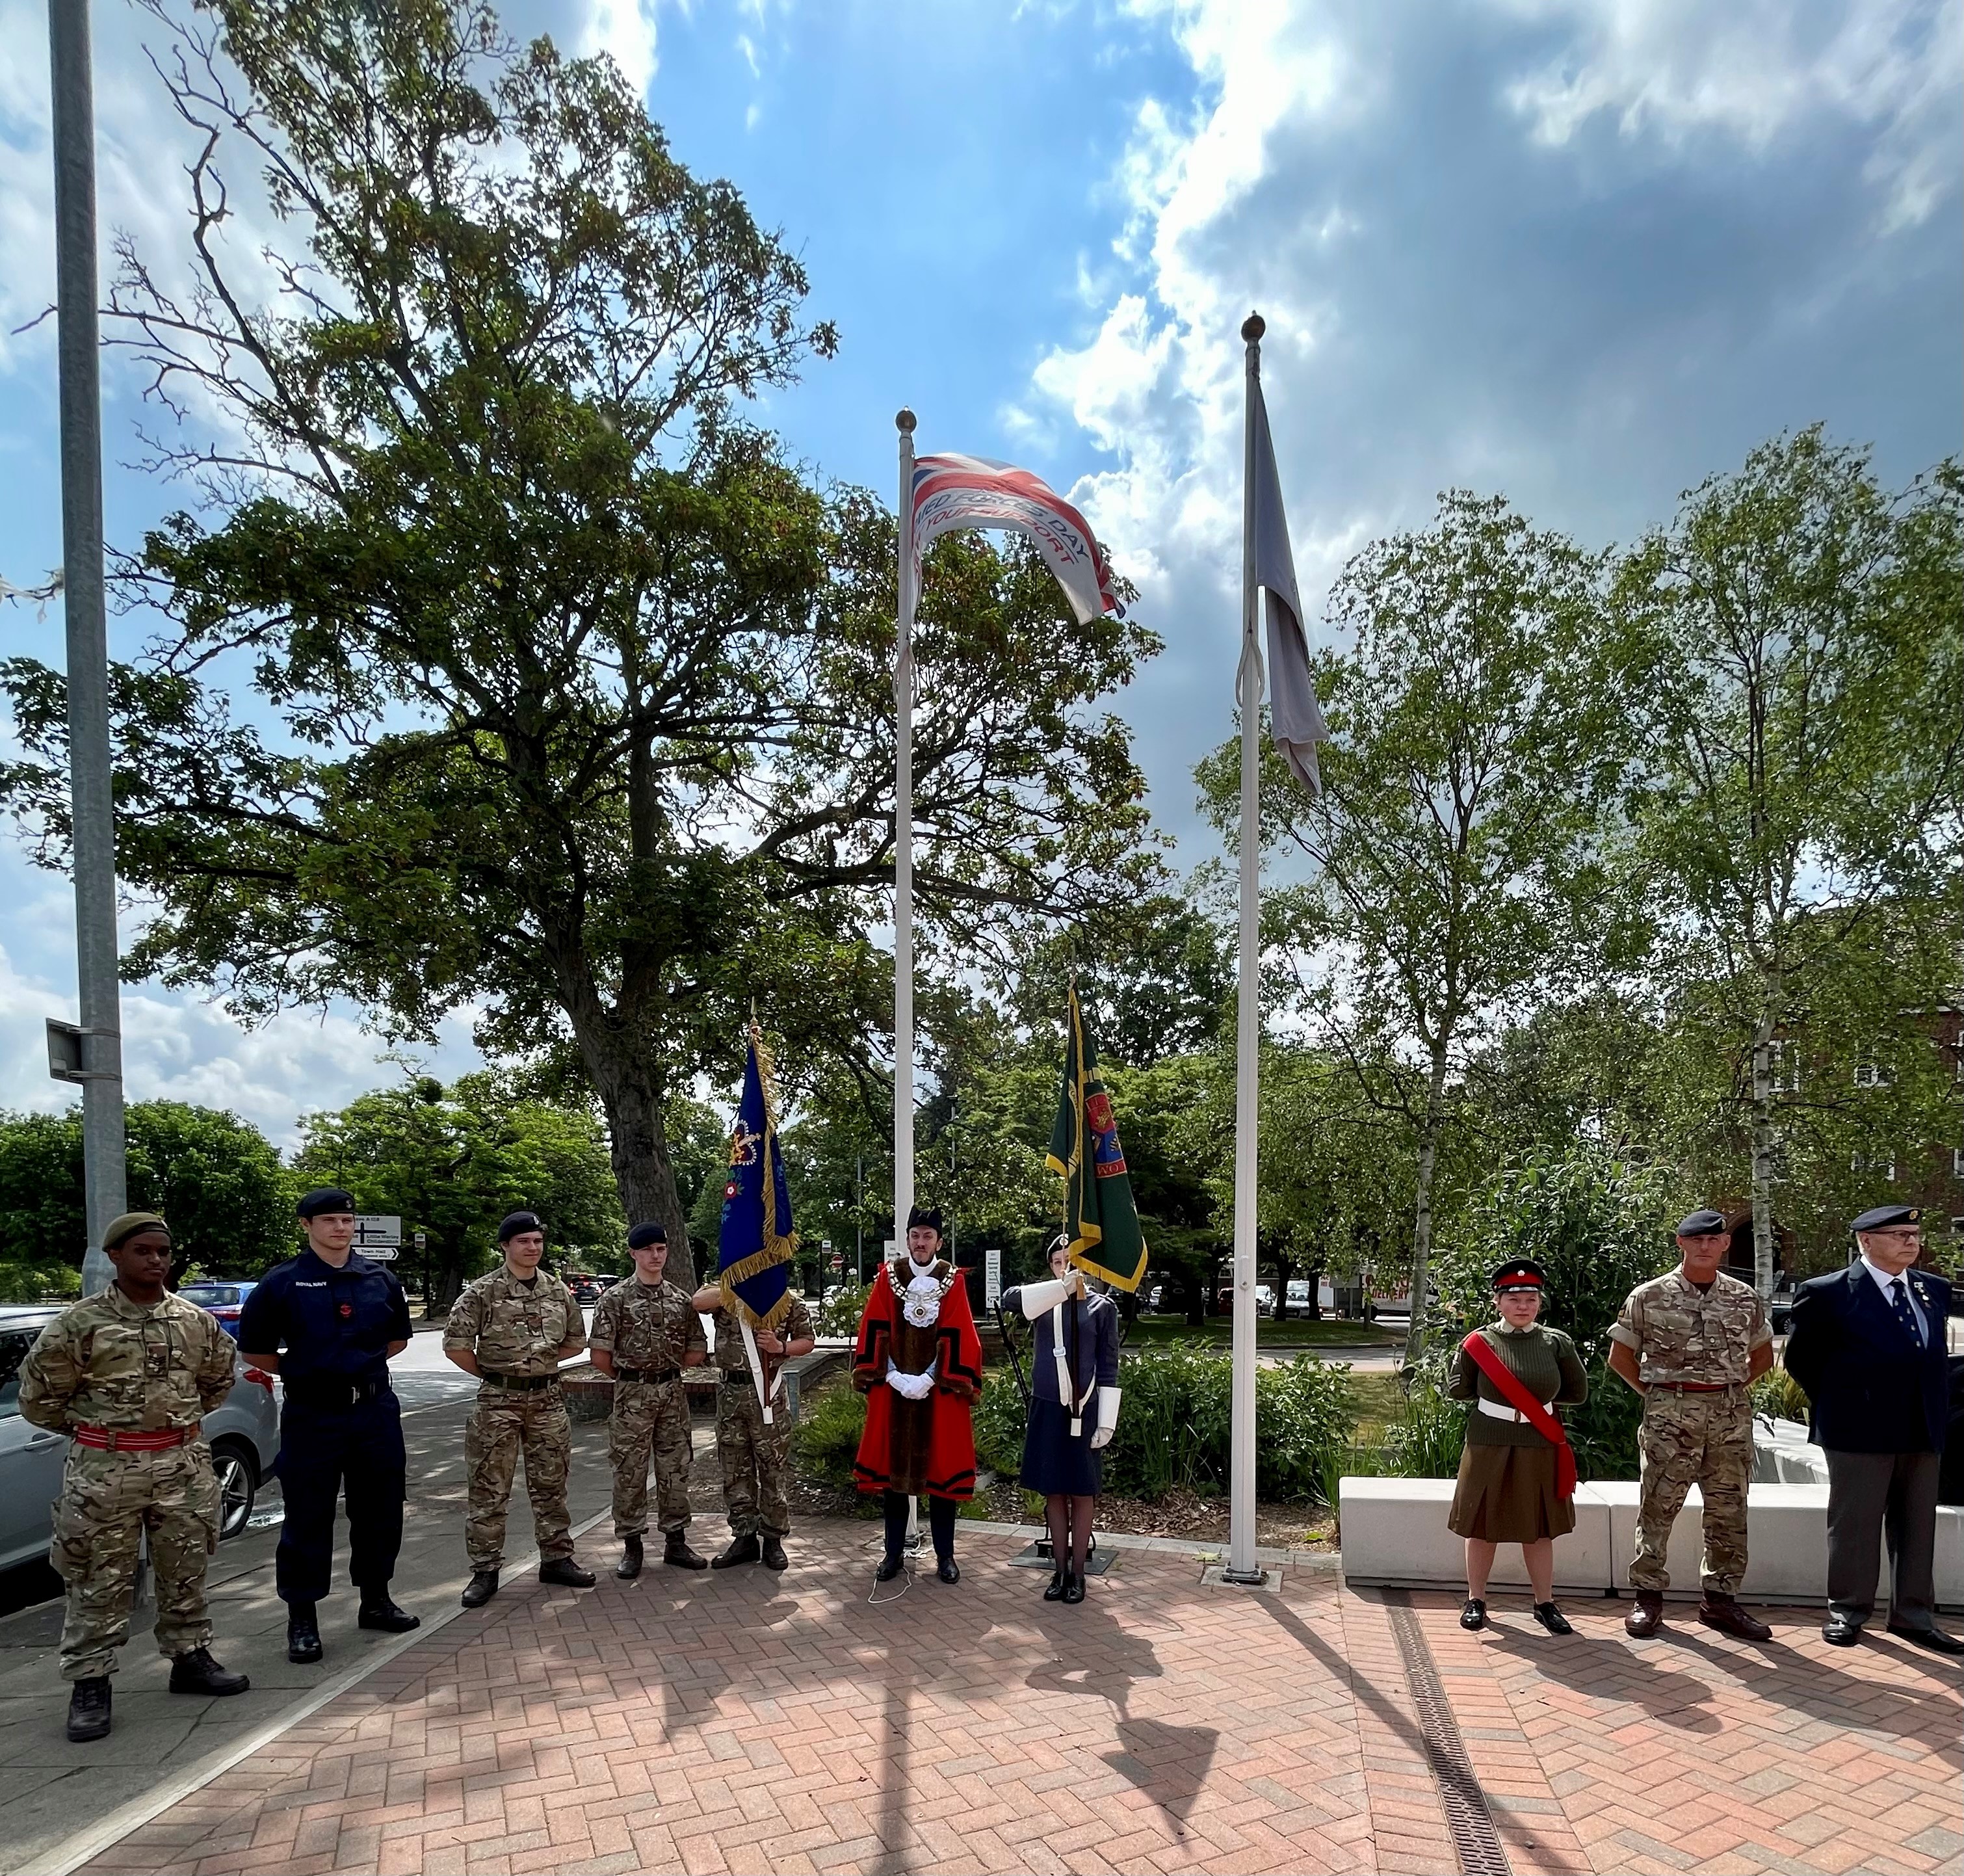 Brentwood CCF cadets, Shenfield CCF cadets with the Mayor of Brentwood, Councillor Gareth Barrett and Major Paul Herlihy of 124 Transport Squadron and Dennis Rensch from the Royal British Legion at the Armed Forces Day flag raising ceremony outside Brentwood Town Hall.